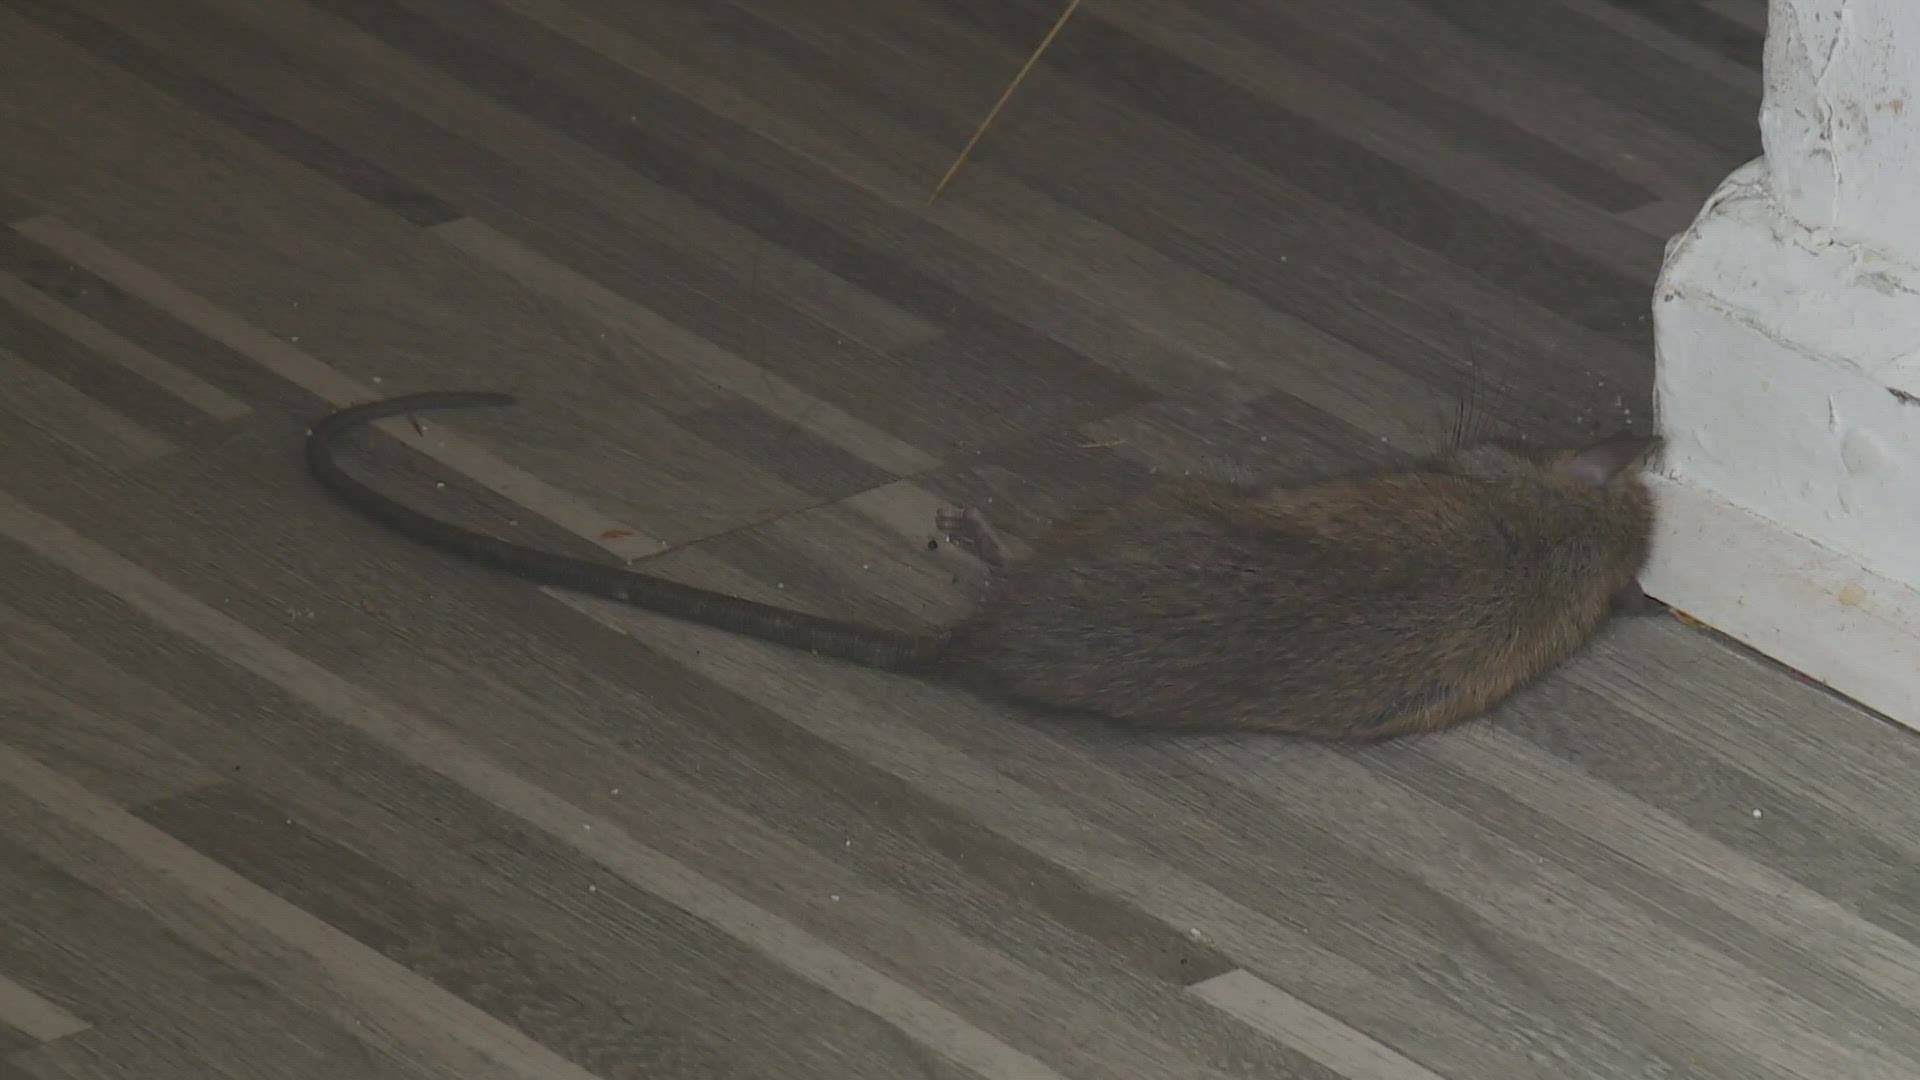 New Orleans tenant says after finding a rodent in bed with her, she left her apartment and hasn't returned back.